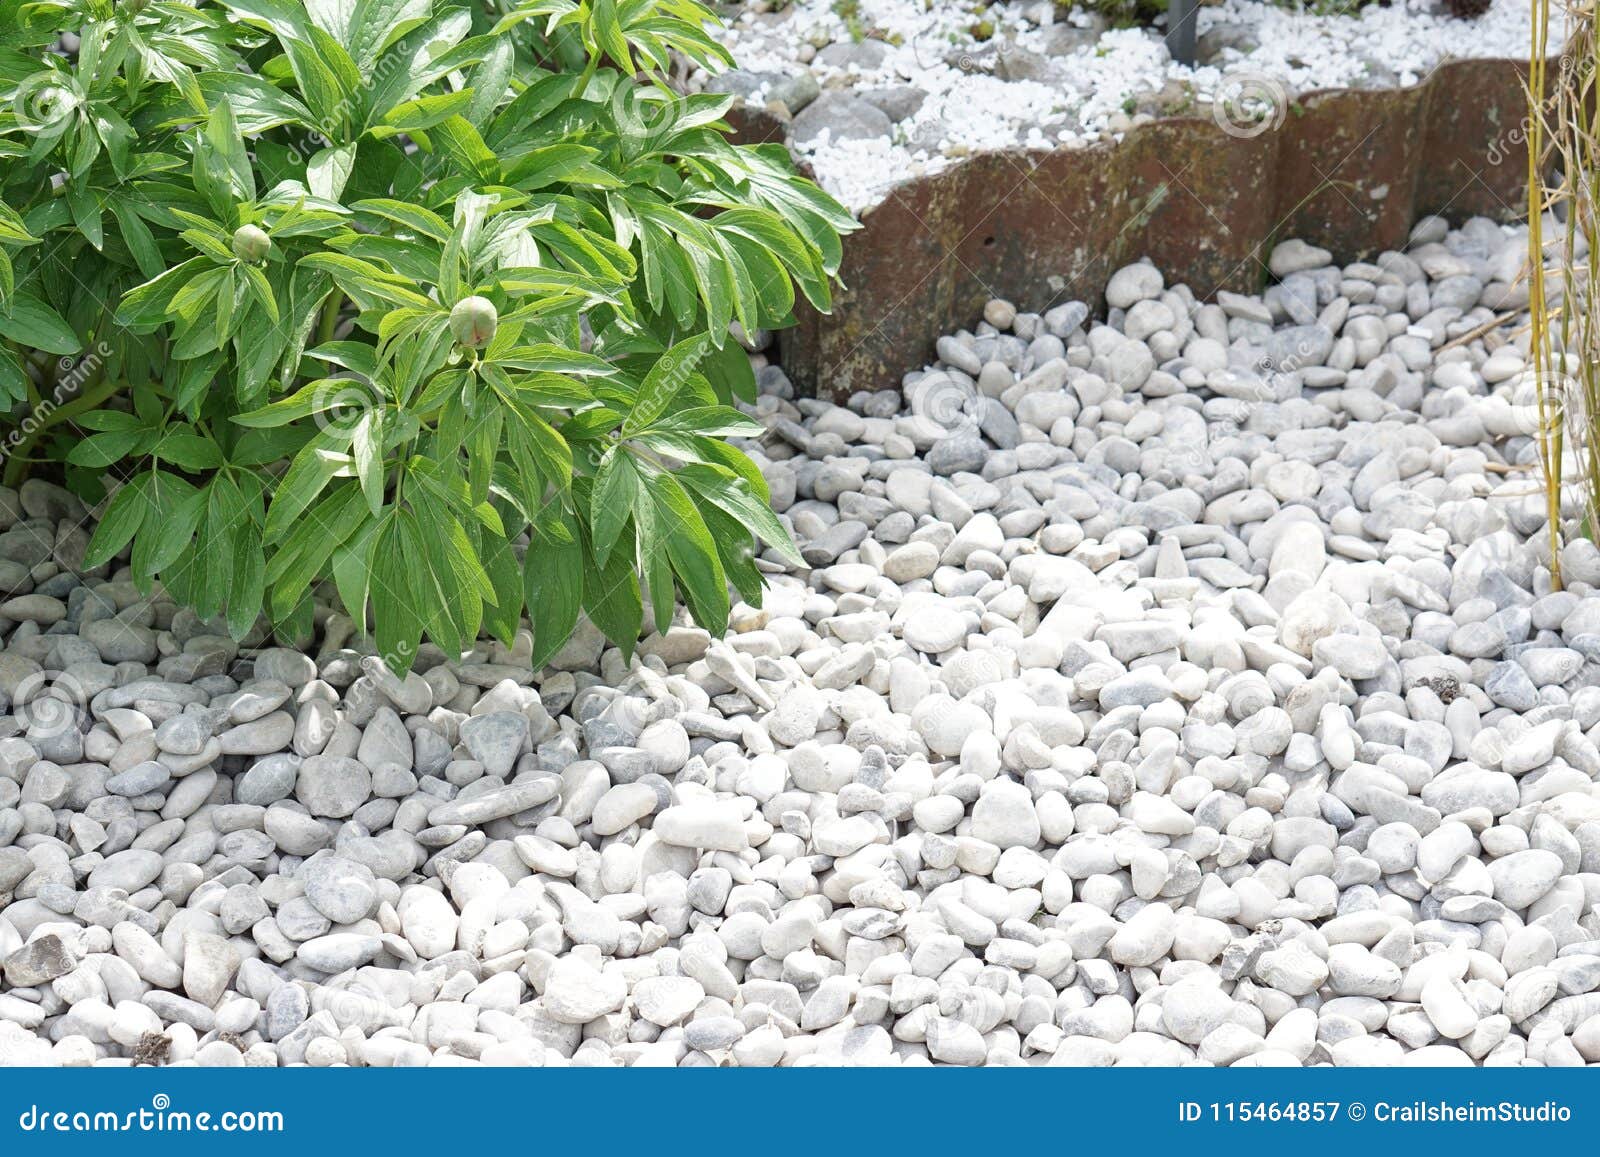 Garden Design With White Stones - 3rb4real